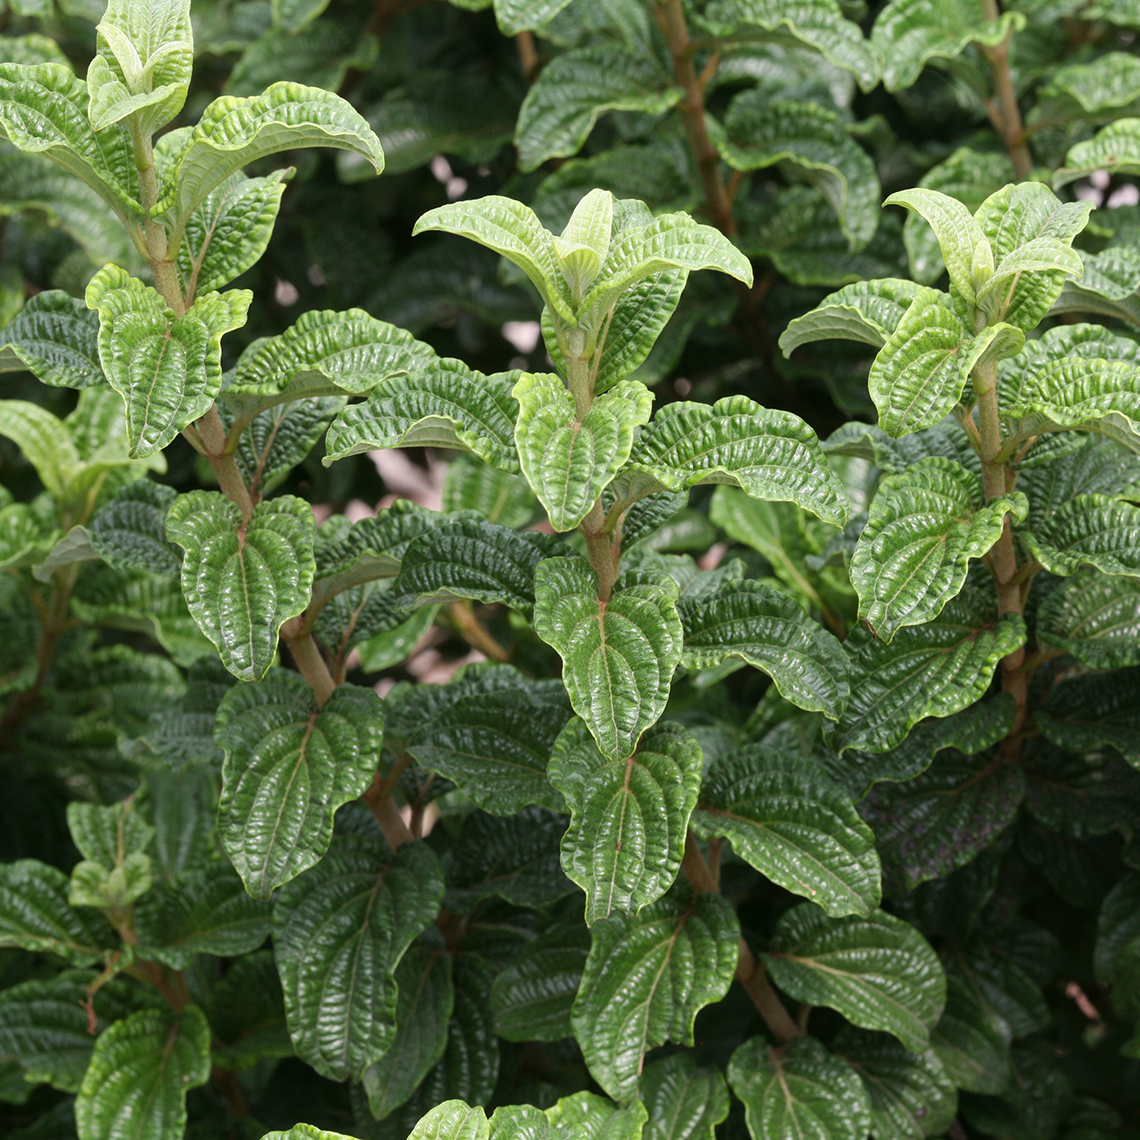 Three branches with quilted foliage on Pucker Up Cornus